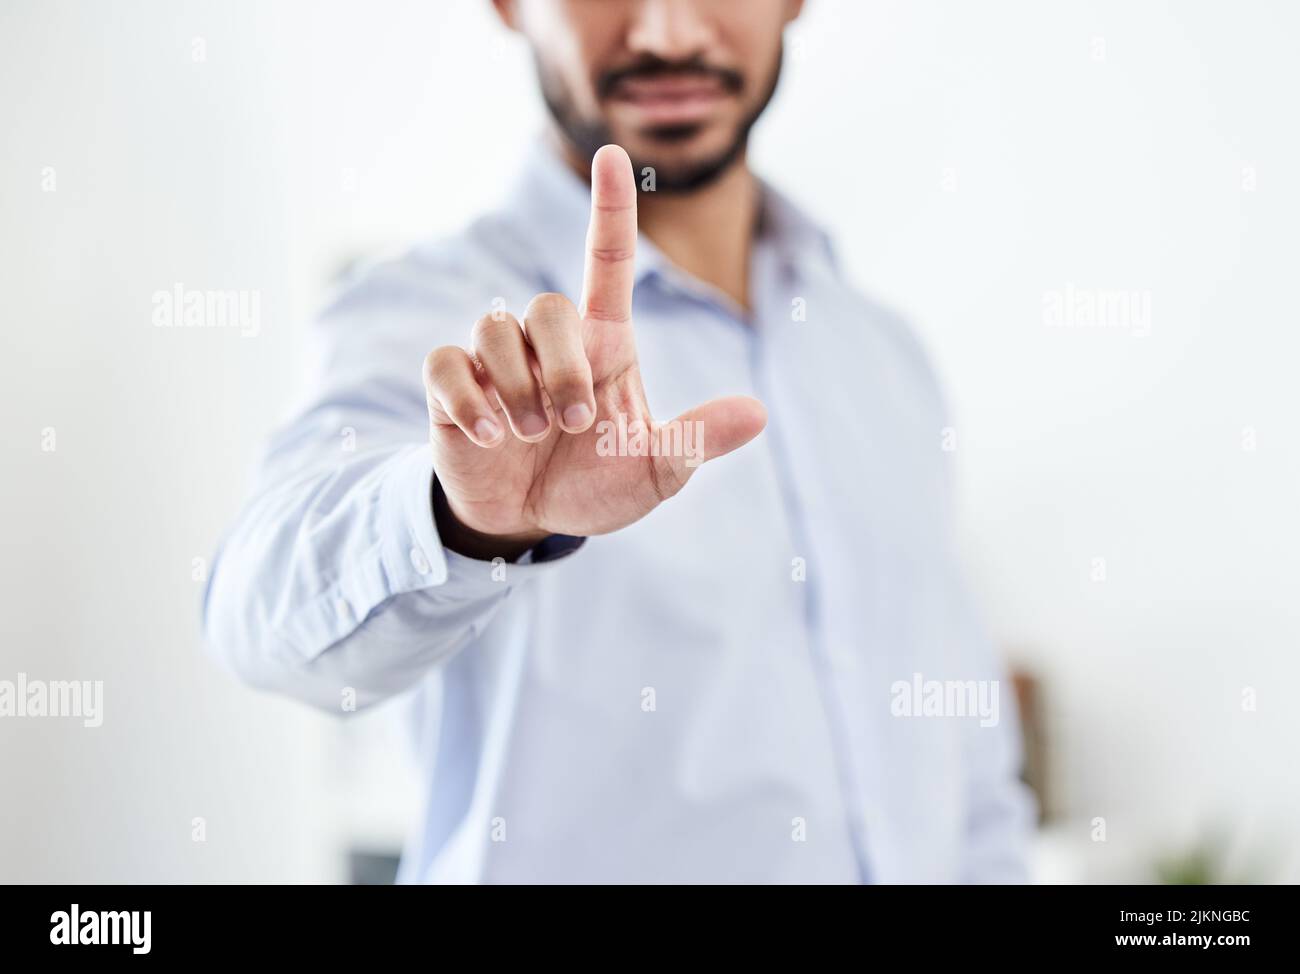 Modern, future and futuristic business man pointing his finger up pressing an empty virtual touchscreen. Closeup portrait of a corporate professional Stock Photo